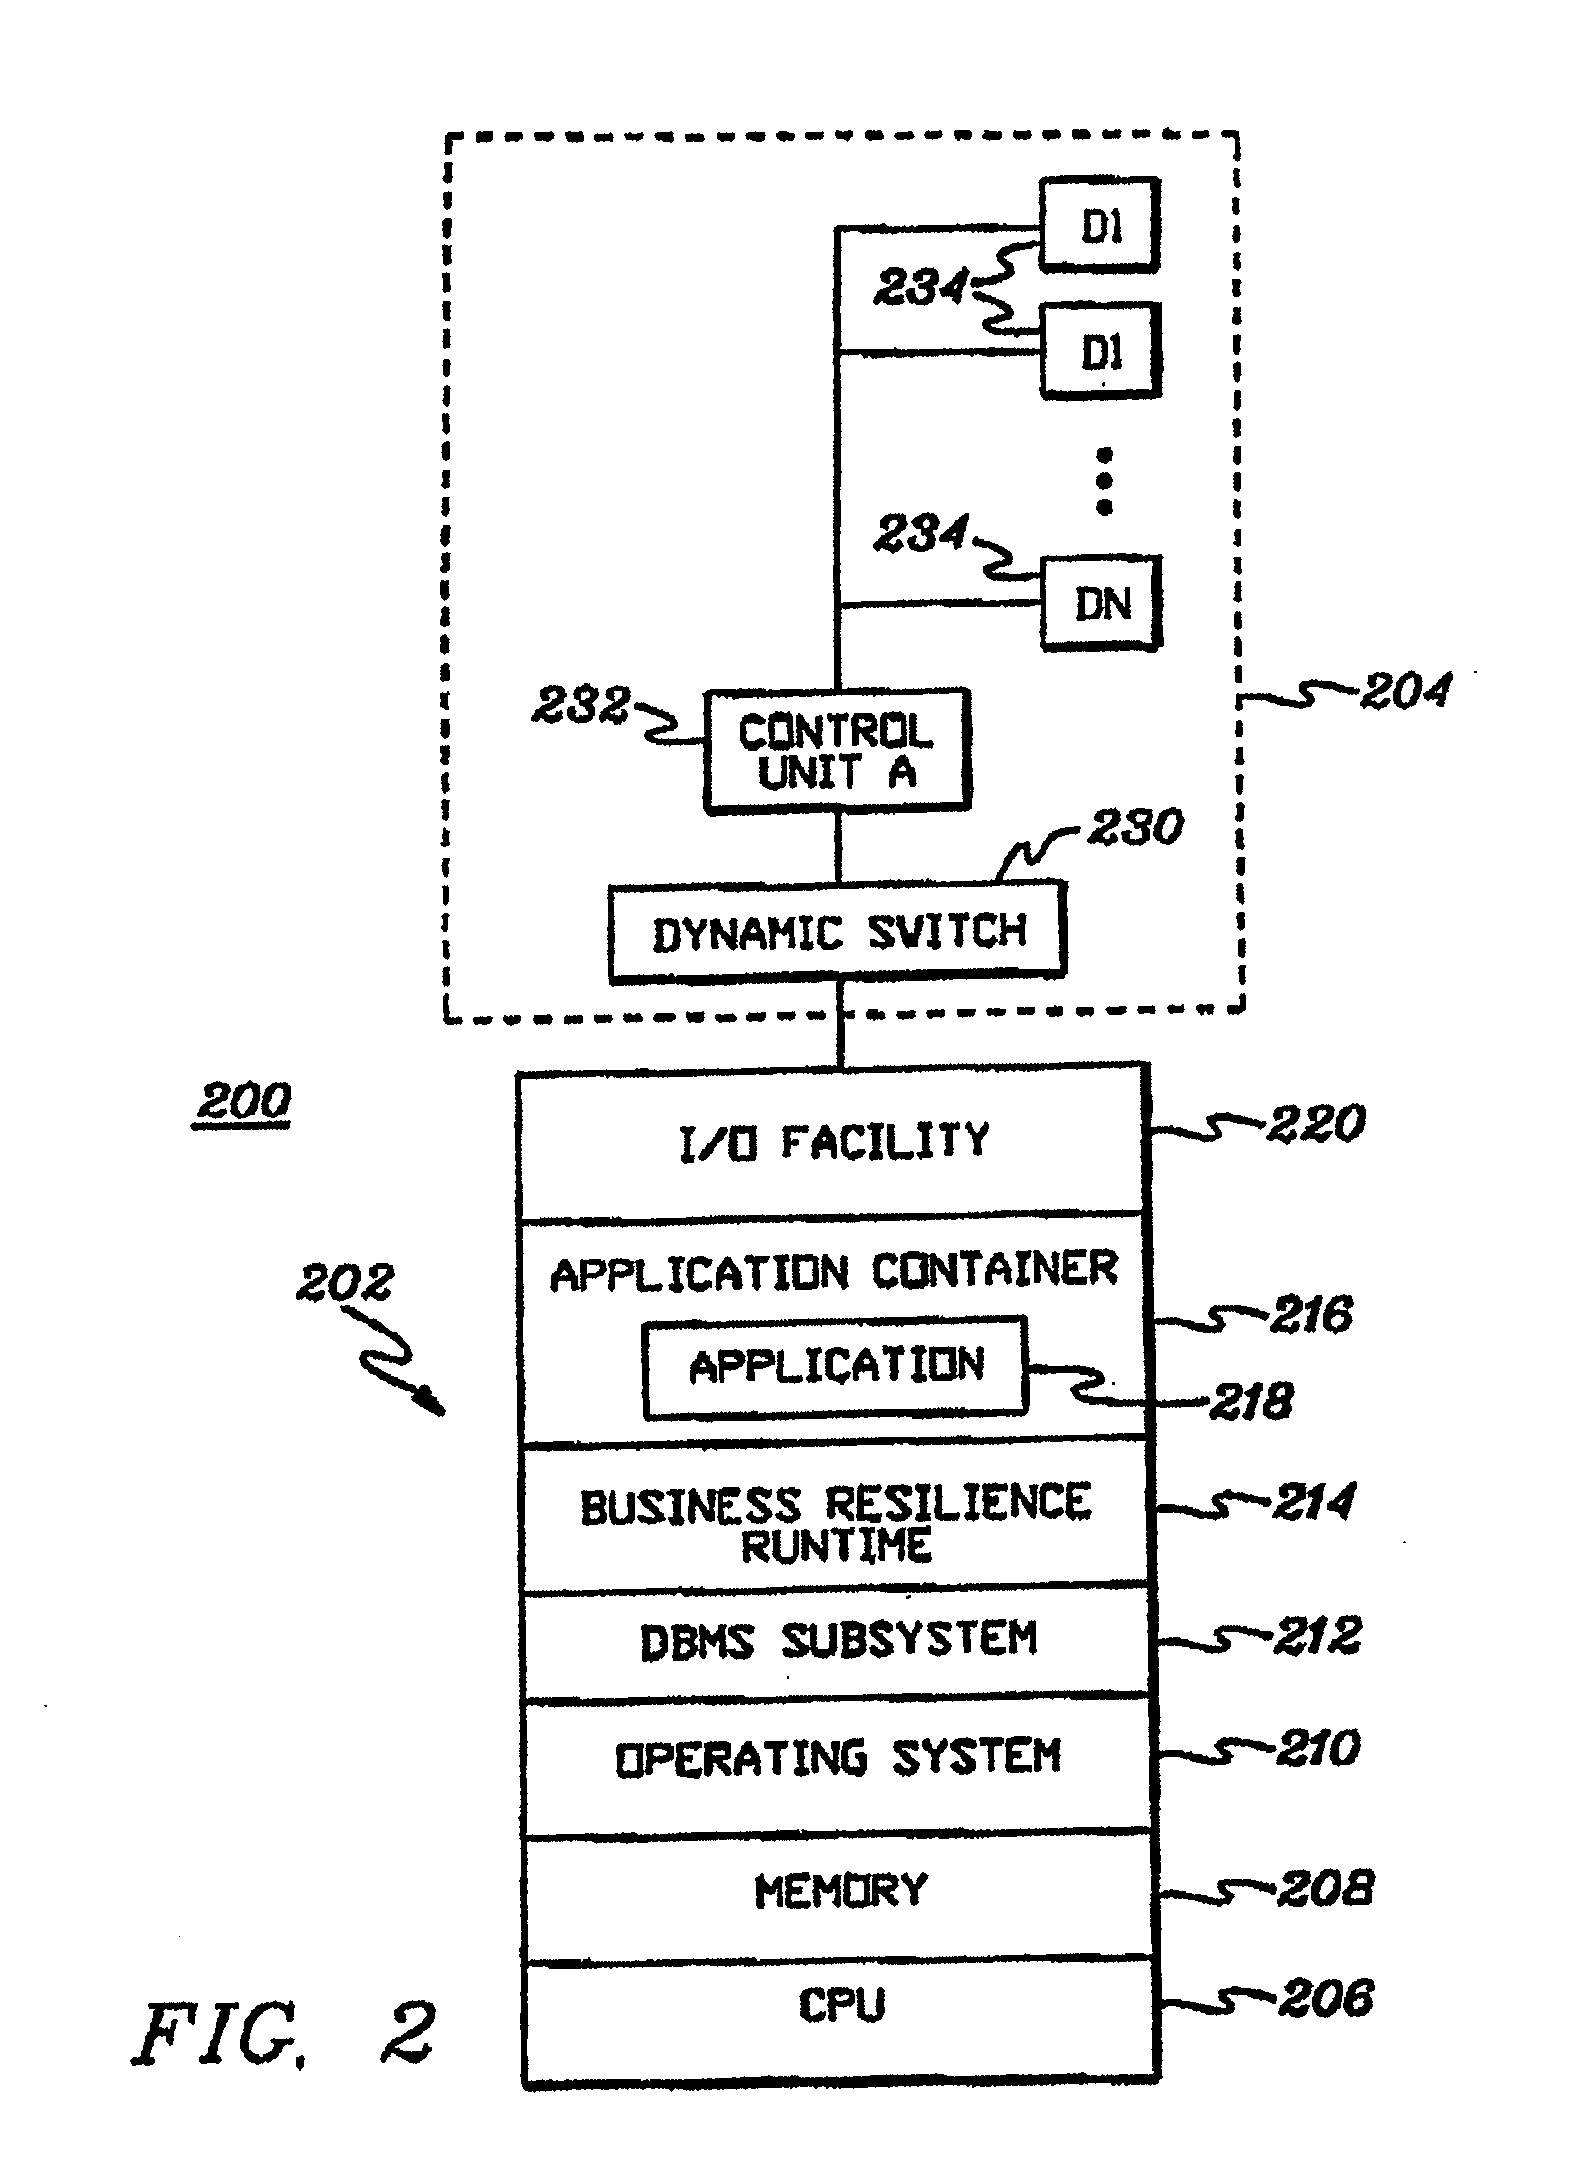 Use of redundancy groups in runtime computer management of business applications